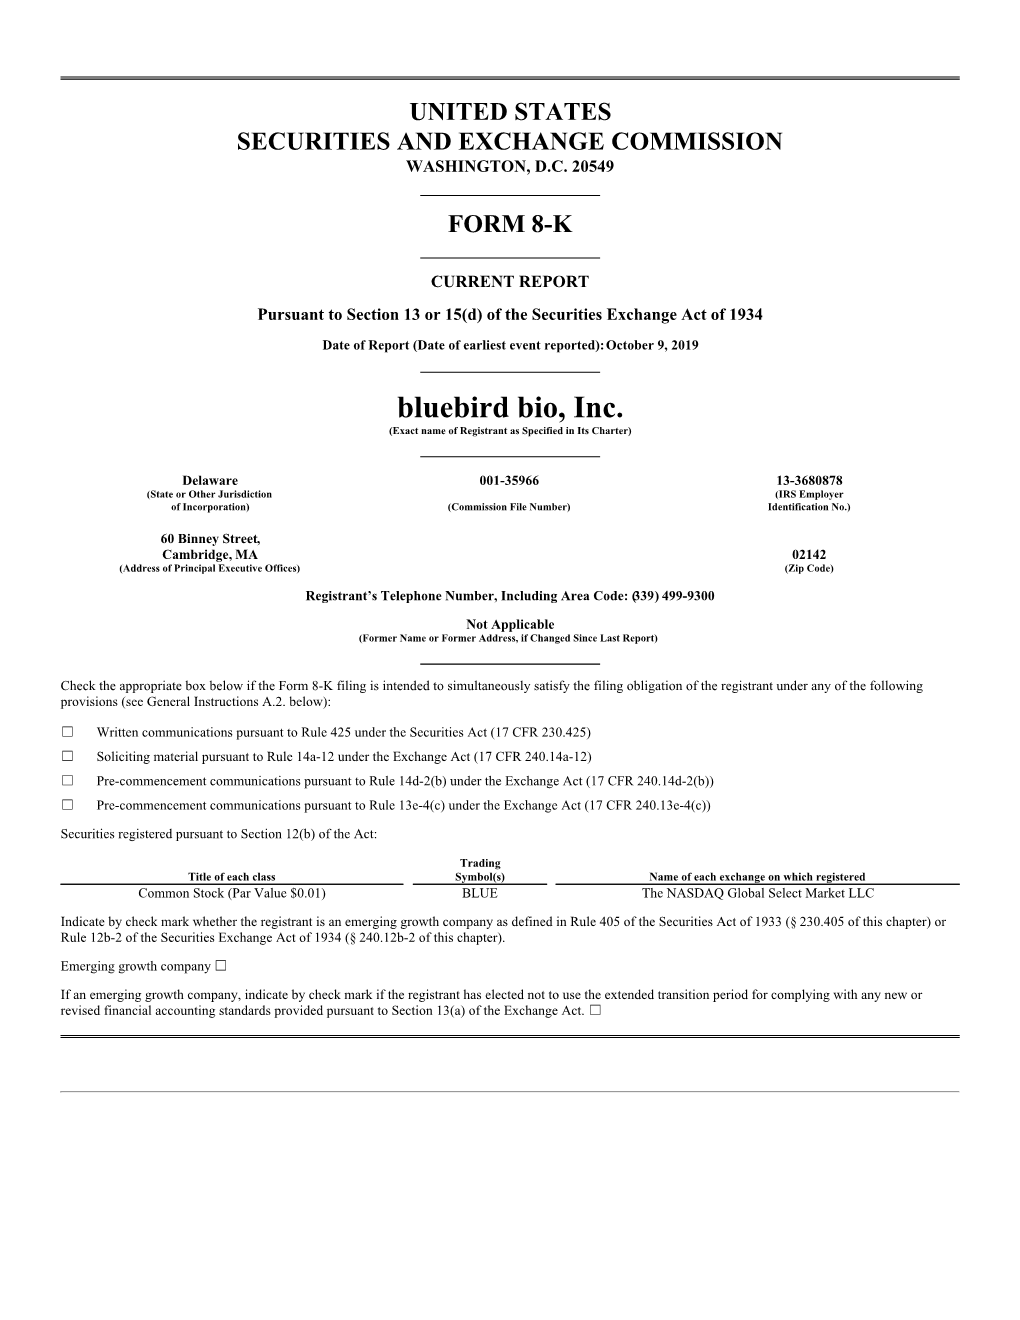 Bluebird Bio, Inc. (Exact Name of Registrant As Specified in Its Charter)